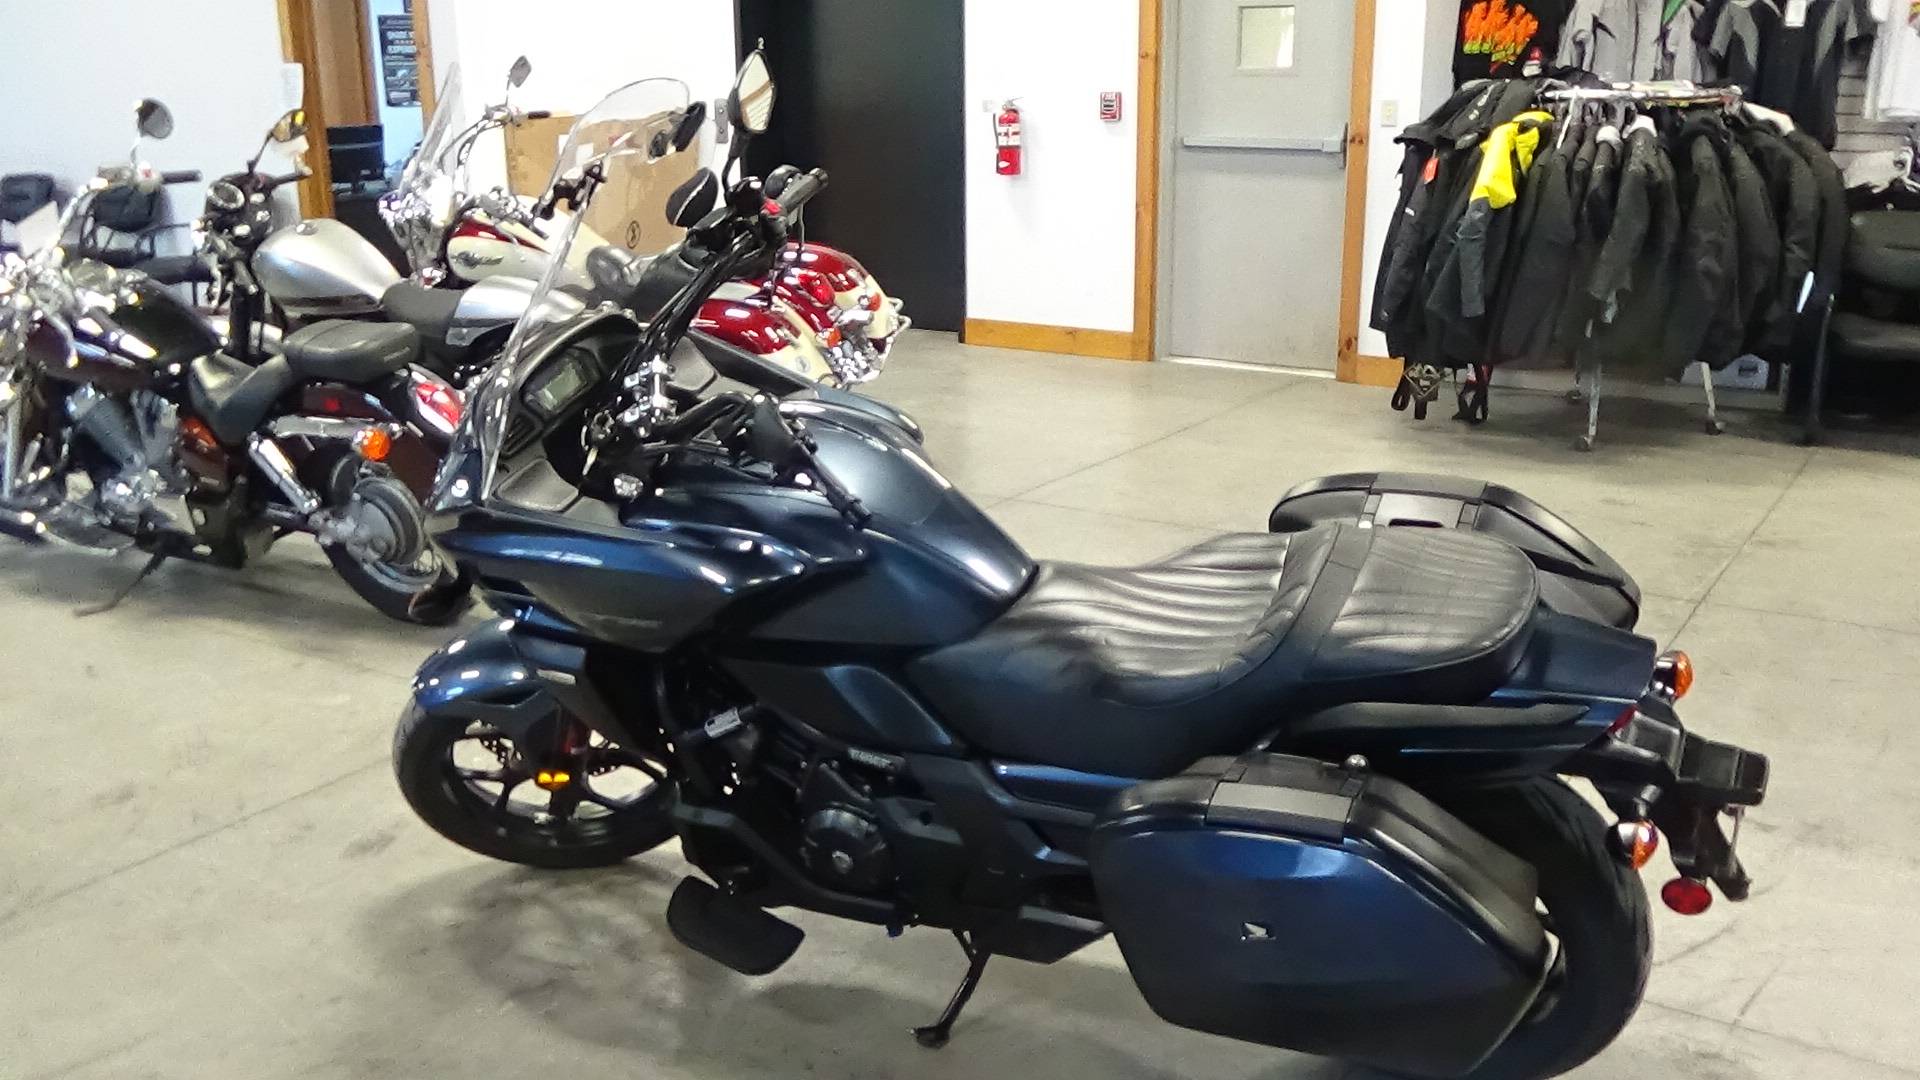 Used 15 Honda Ctx 700 Dct Abs Motorcycles In Adams Ma Stock Number